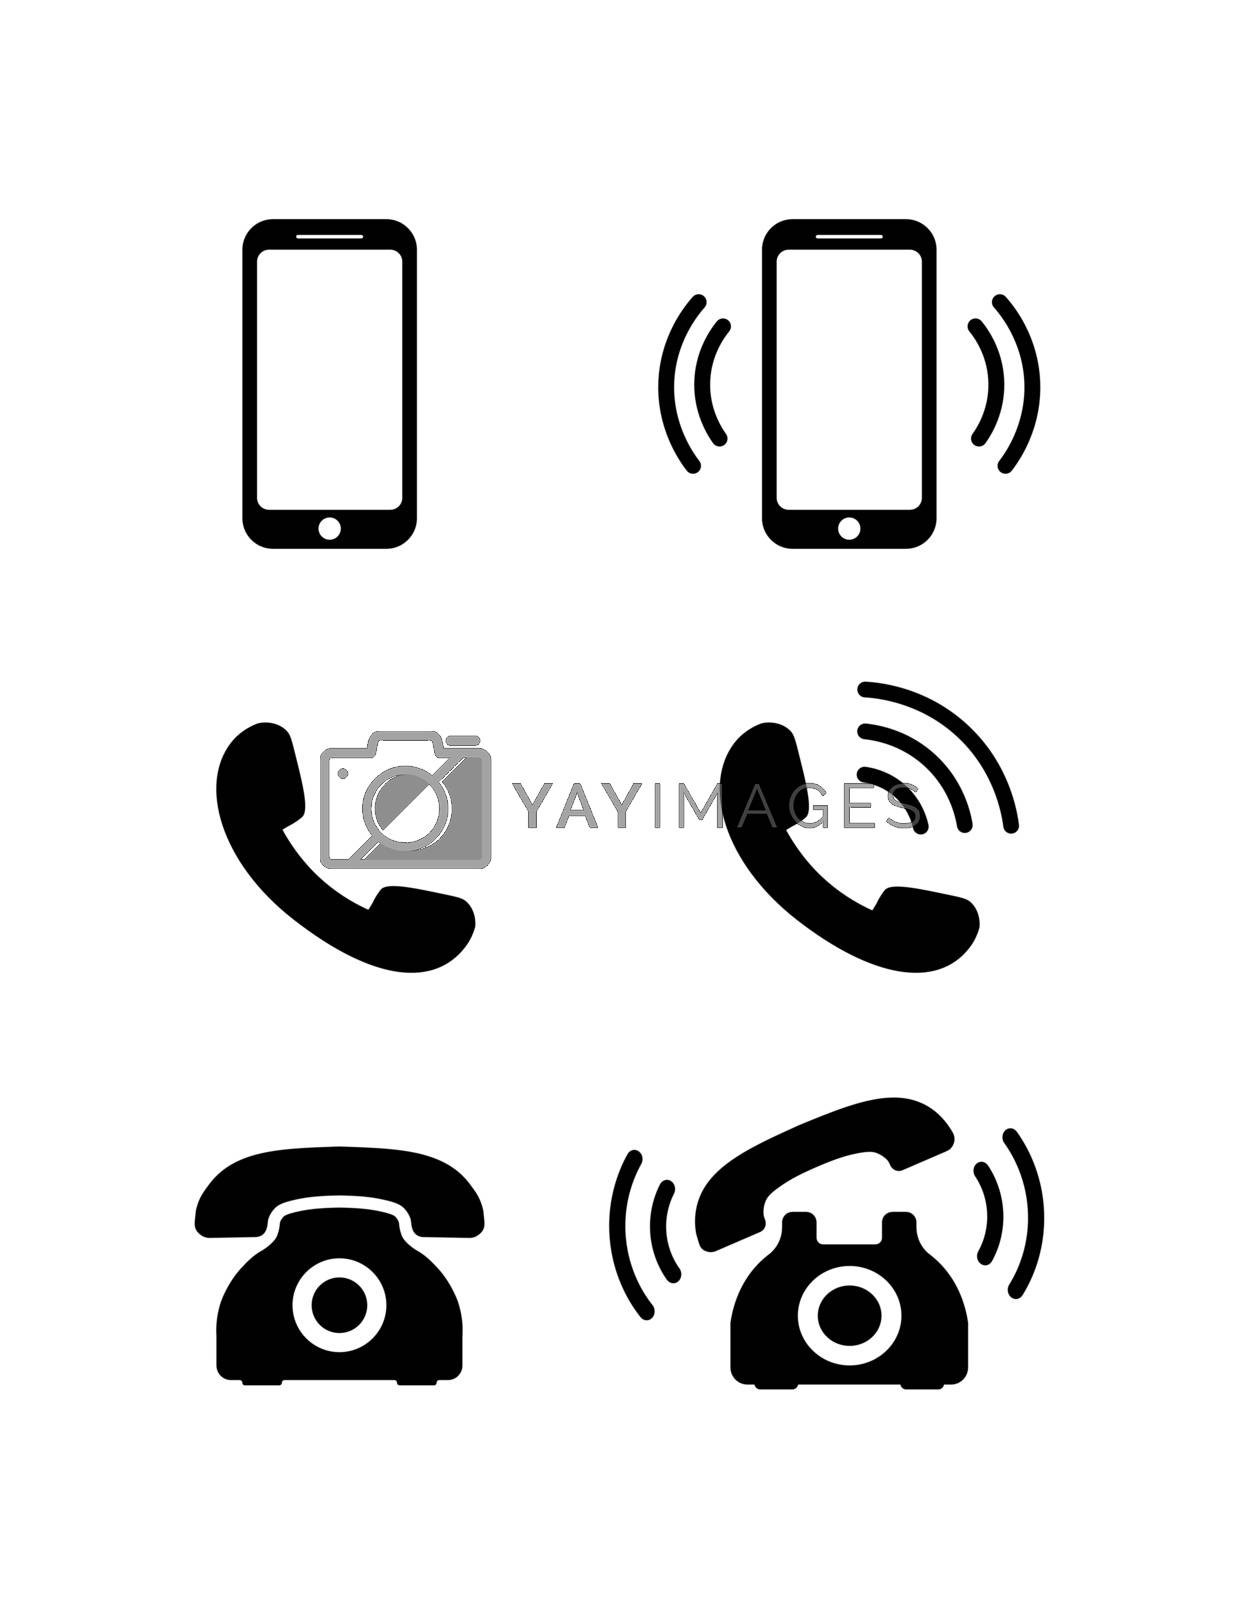 Retro and mobile phone icon set. Black phone symbols in flat style. Ringing phone signs isolated on white background. Simple vector telephone abstract icons for web site design or button to mobile app